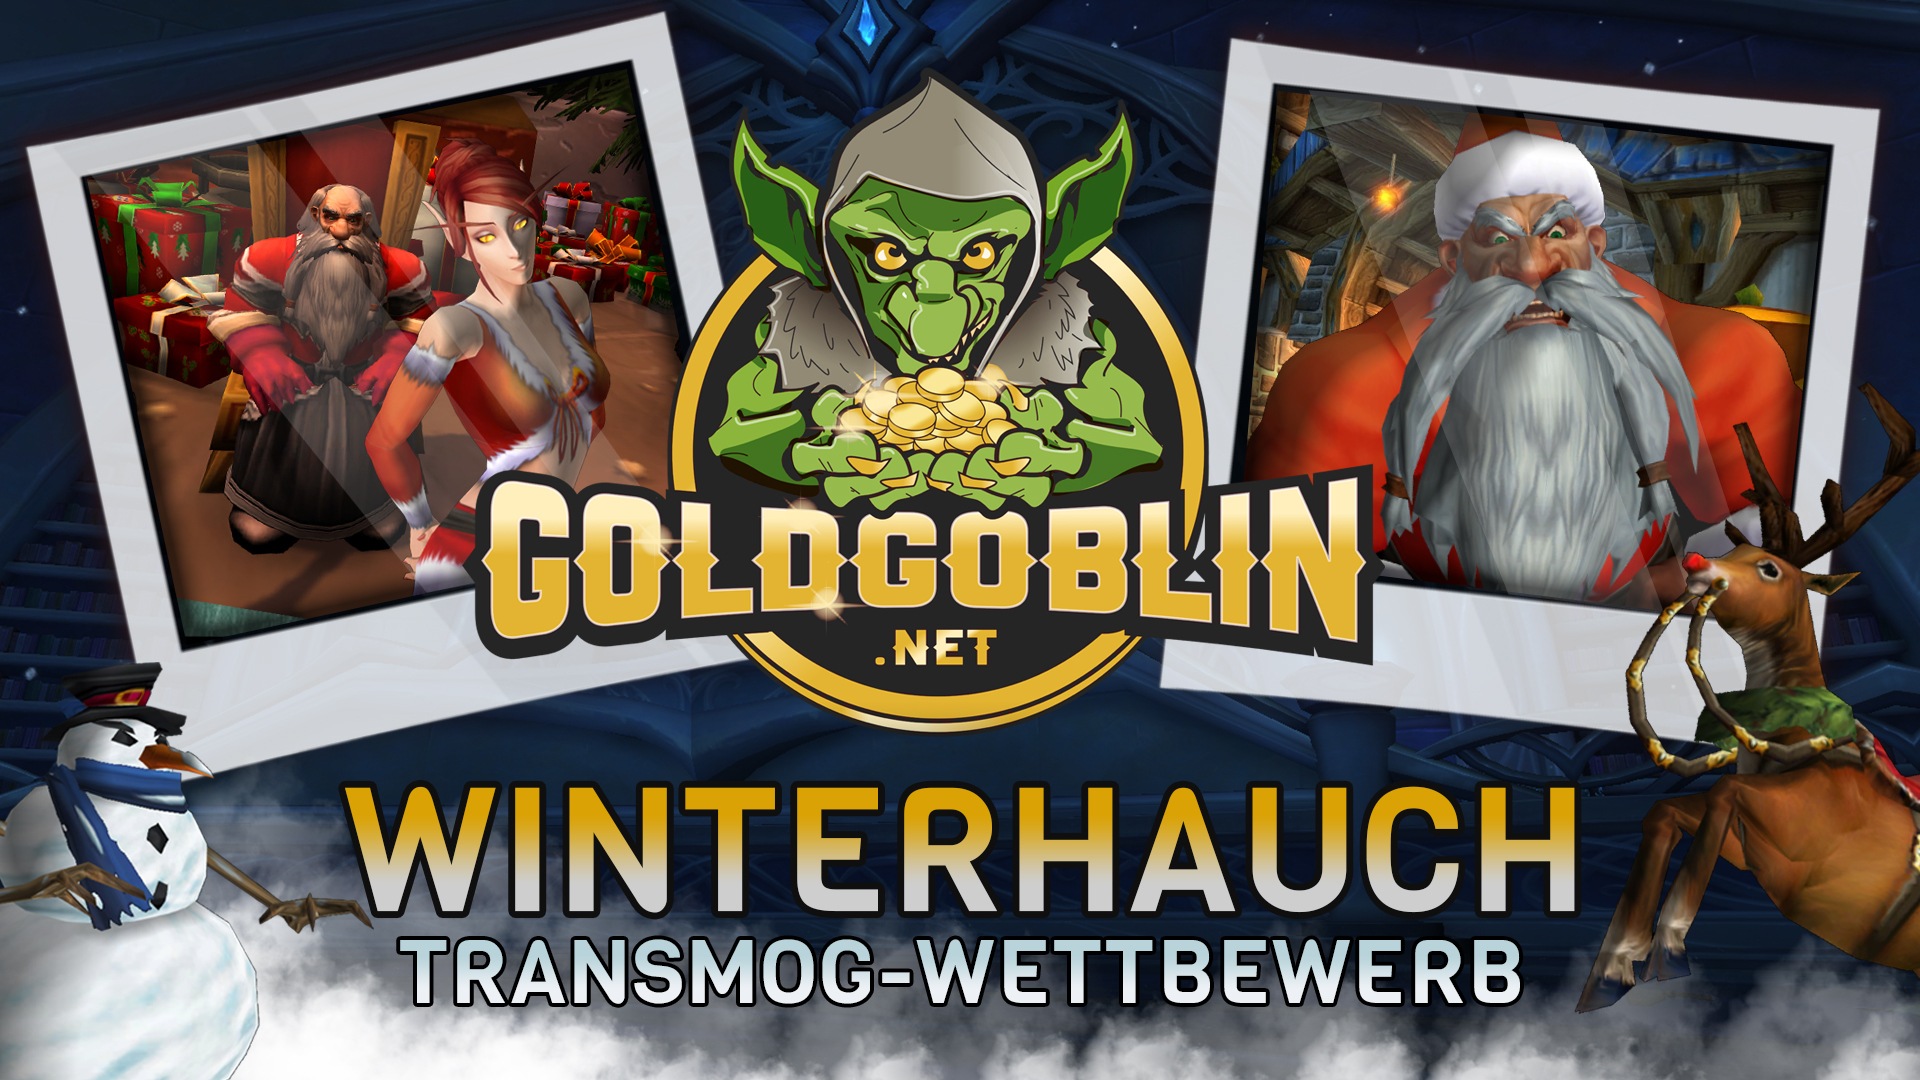  Goldgoblin logo with polaroid style 'photos' of greatfather winter that says Winter transmog competition